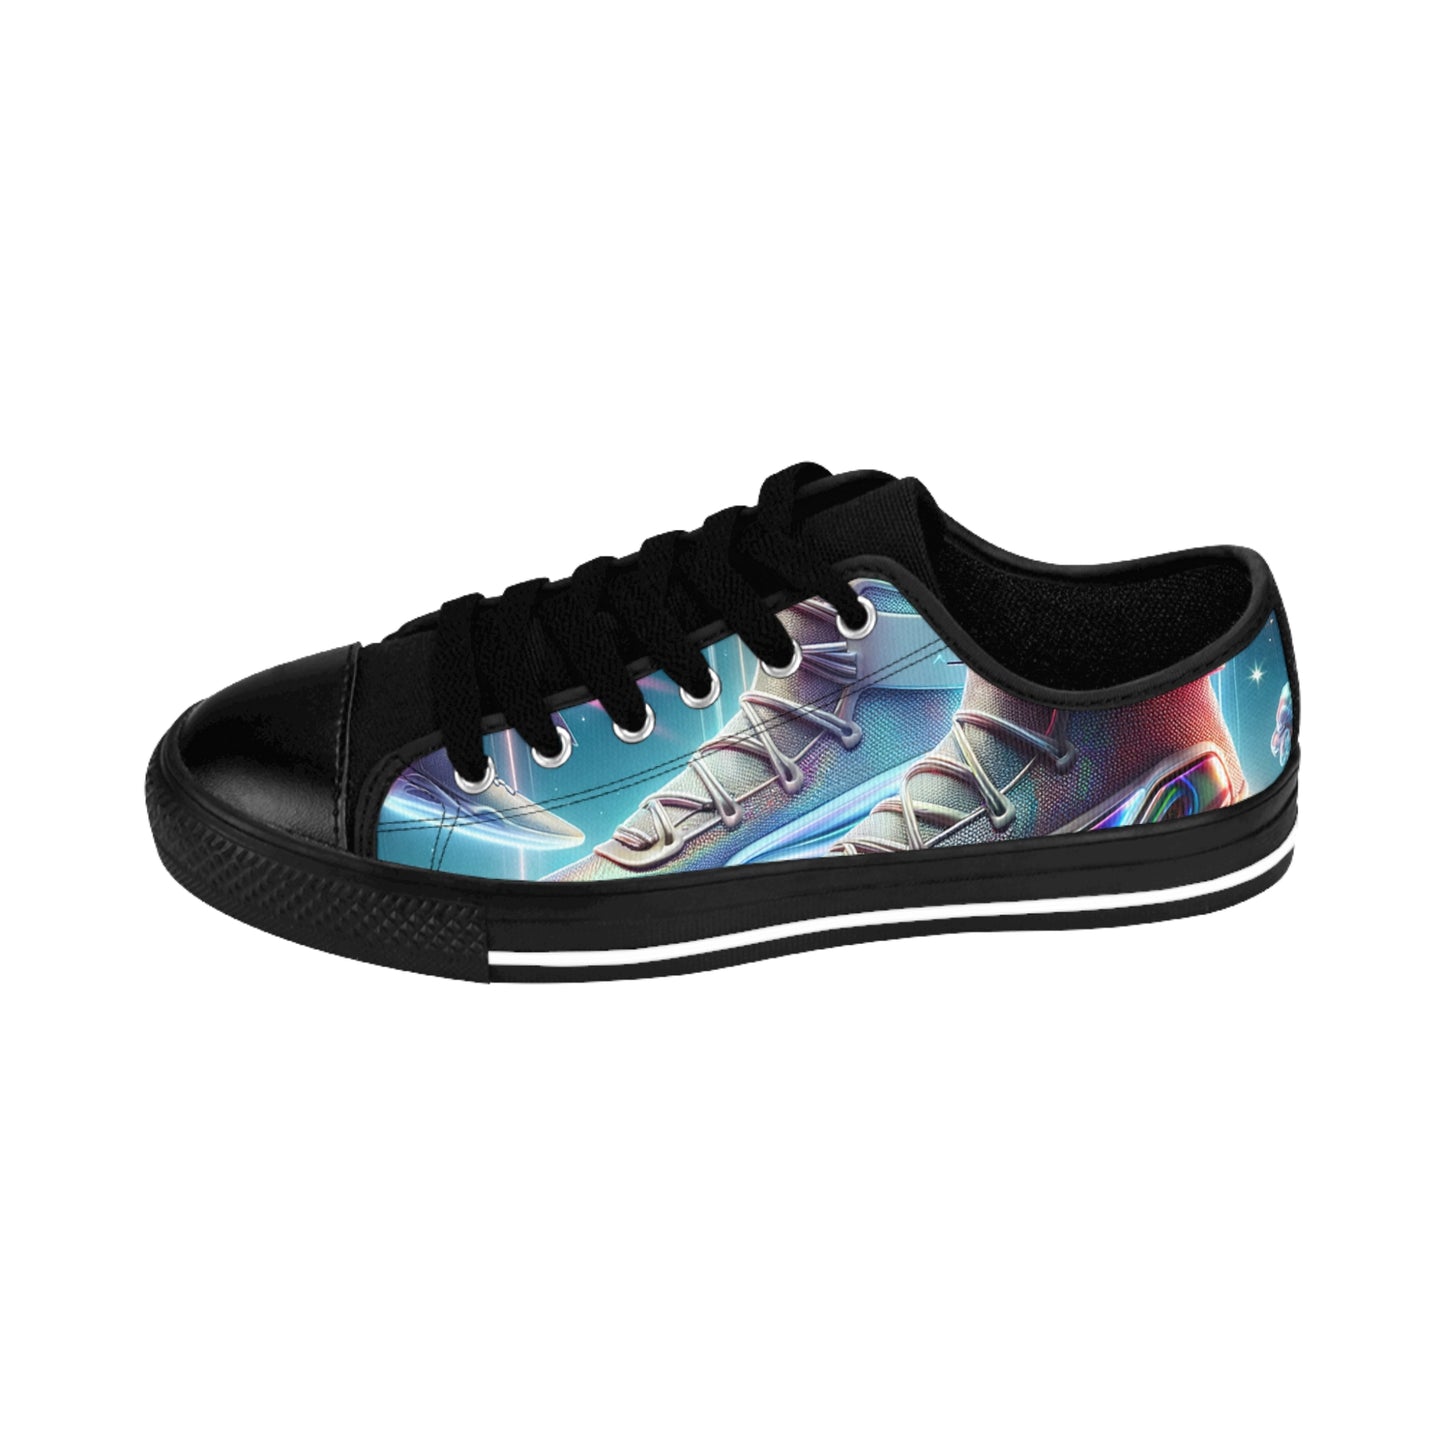 Valonia Luxe - Low Top